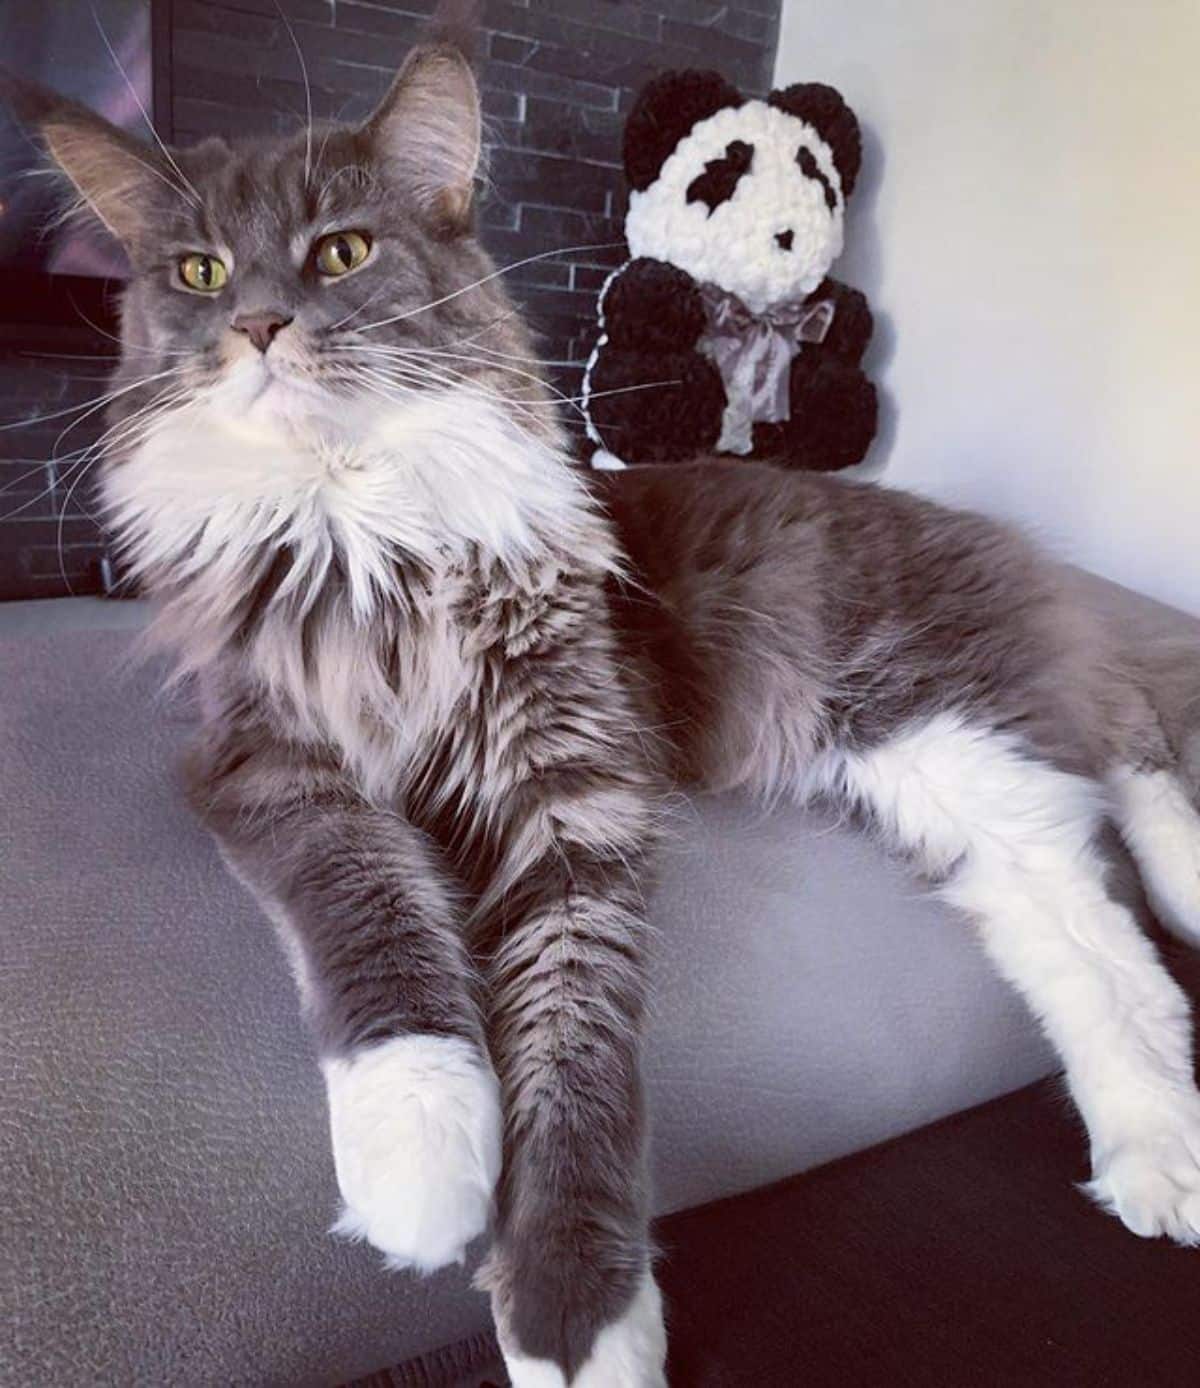 A gray-white maine coon lying on a bed near a panda toy.